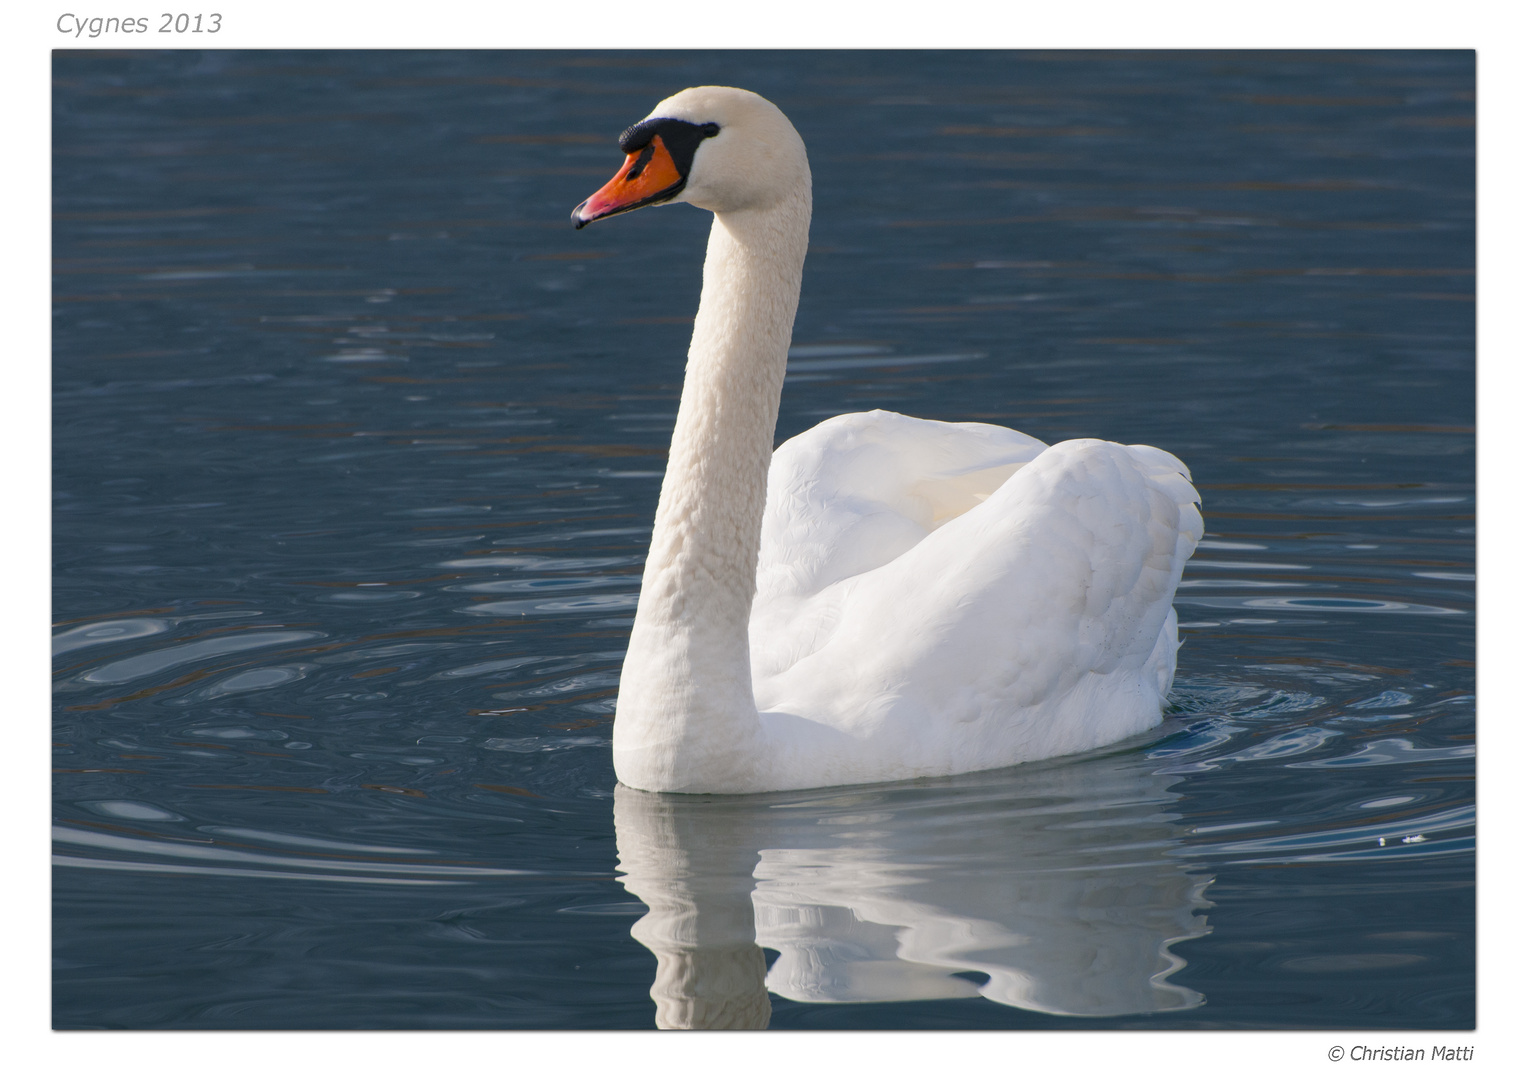 Cygne solitaire